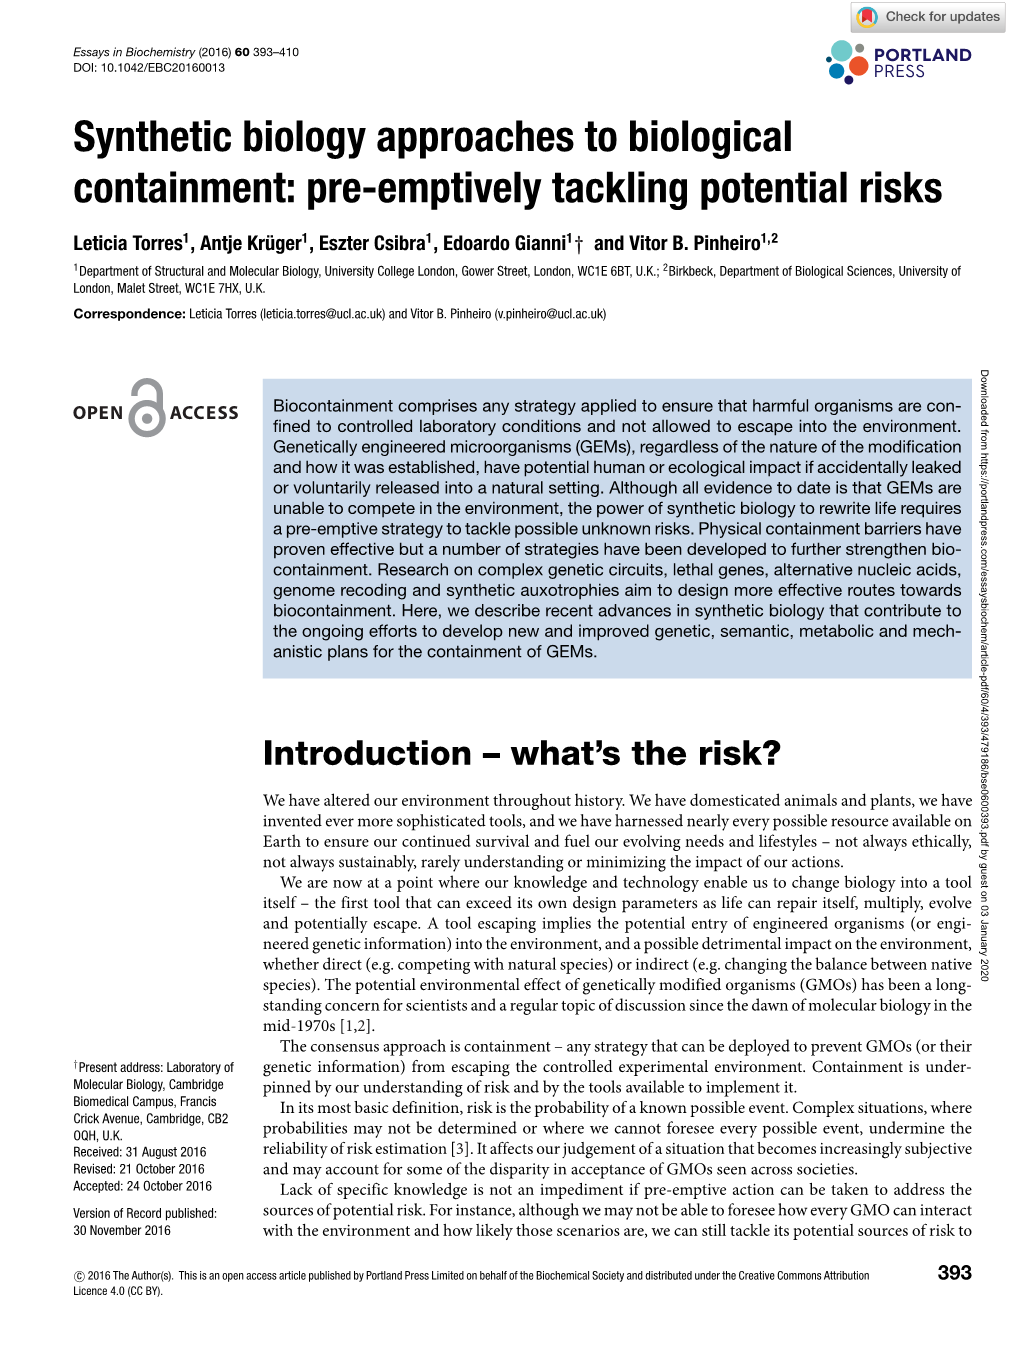 Synthetic Biology Approaches to Biological Containment: Pre-Emptively Tackling Potential Risks